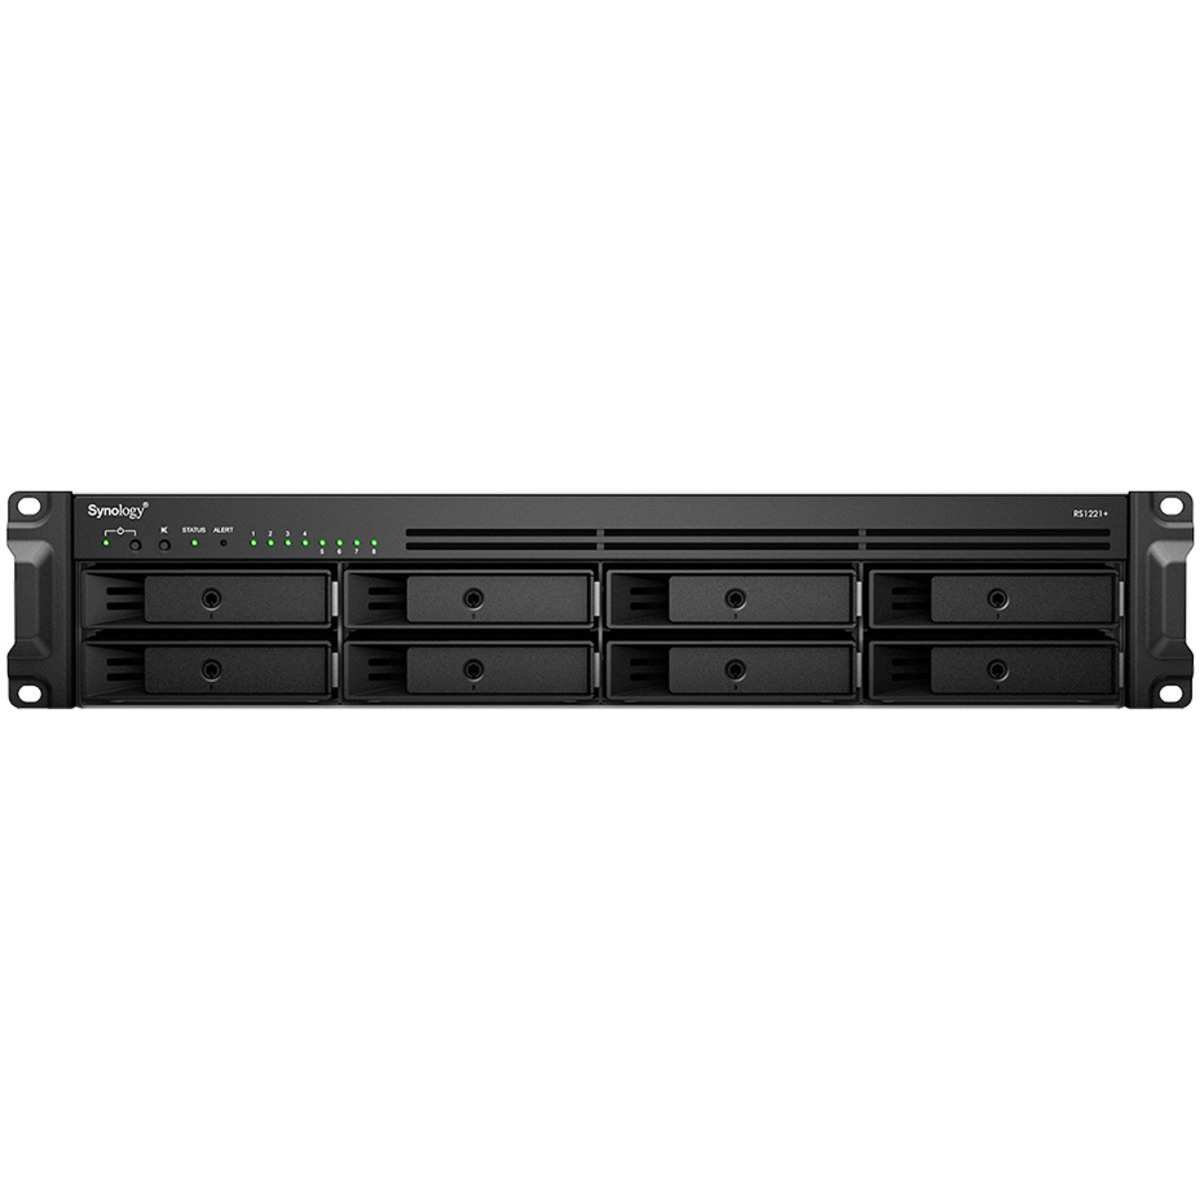 buy $4189 Synology RackStation RS1221RP+ 16tb RackMount NAS - Network Attached Storage Device 8x2000gb Western Digital Red SA500 WDS200T1R0A 2.5 SATA 6Gb/s SSD NAS Class Drives Installed - Burn-In Tested - nas headquarters buy network attached storage server device das new raid-5 free shipping usa RackStation RS1221RP+